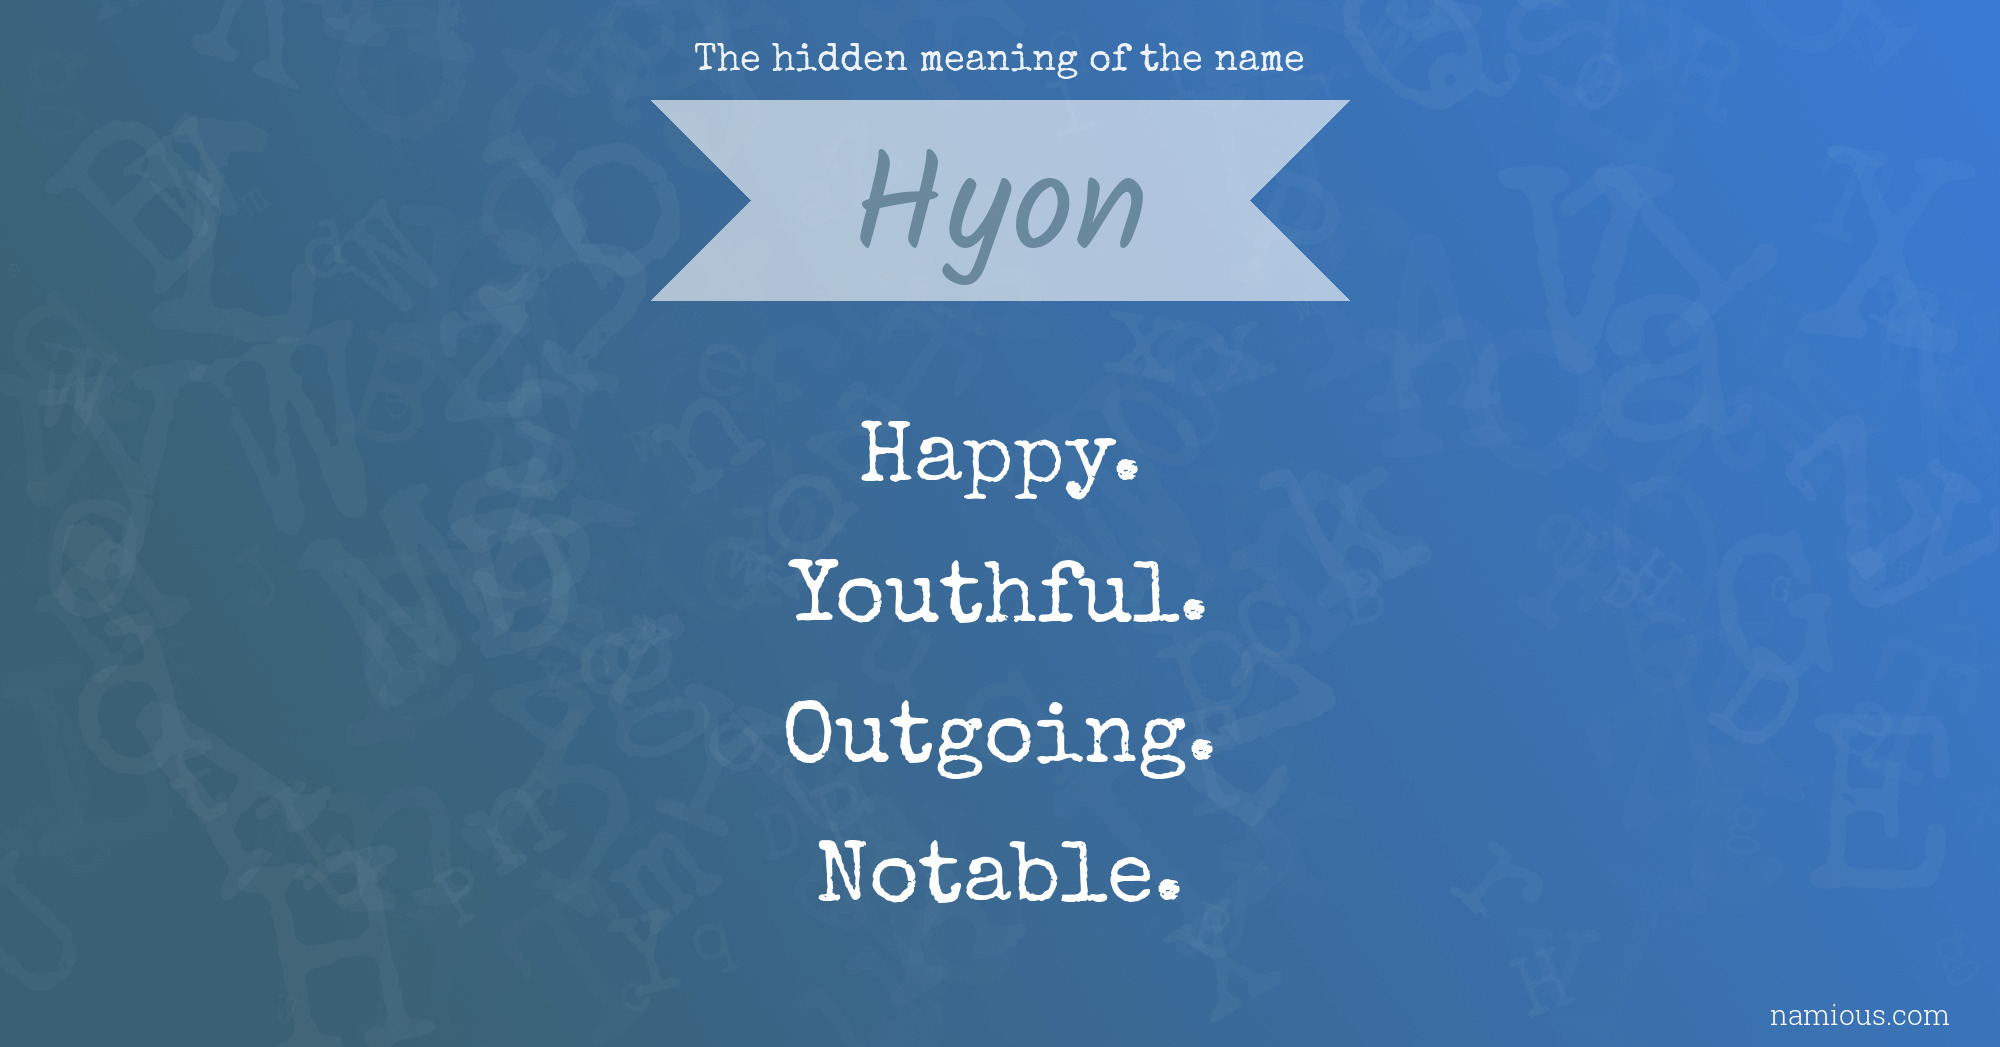 The hidden meaning of the name Hyon